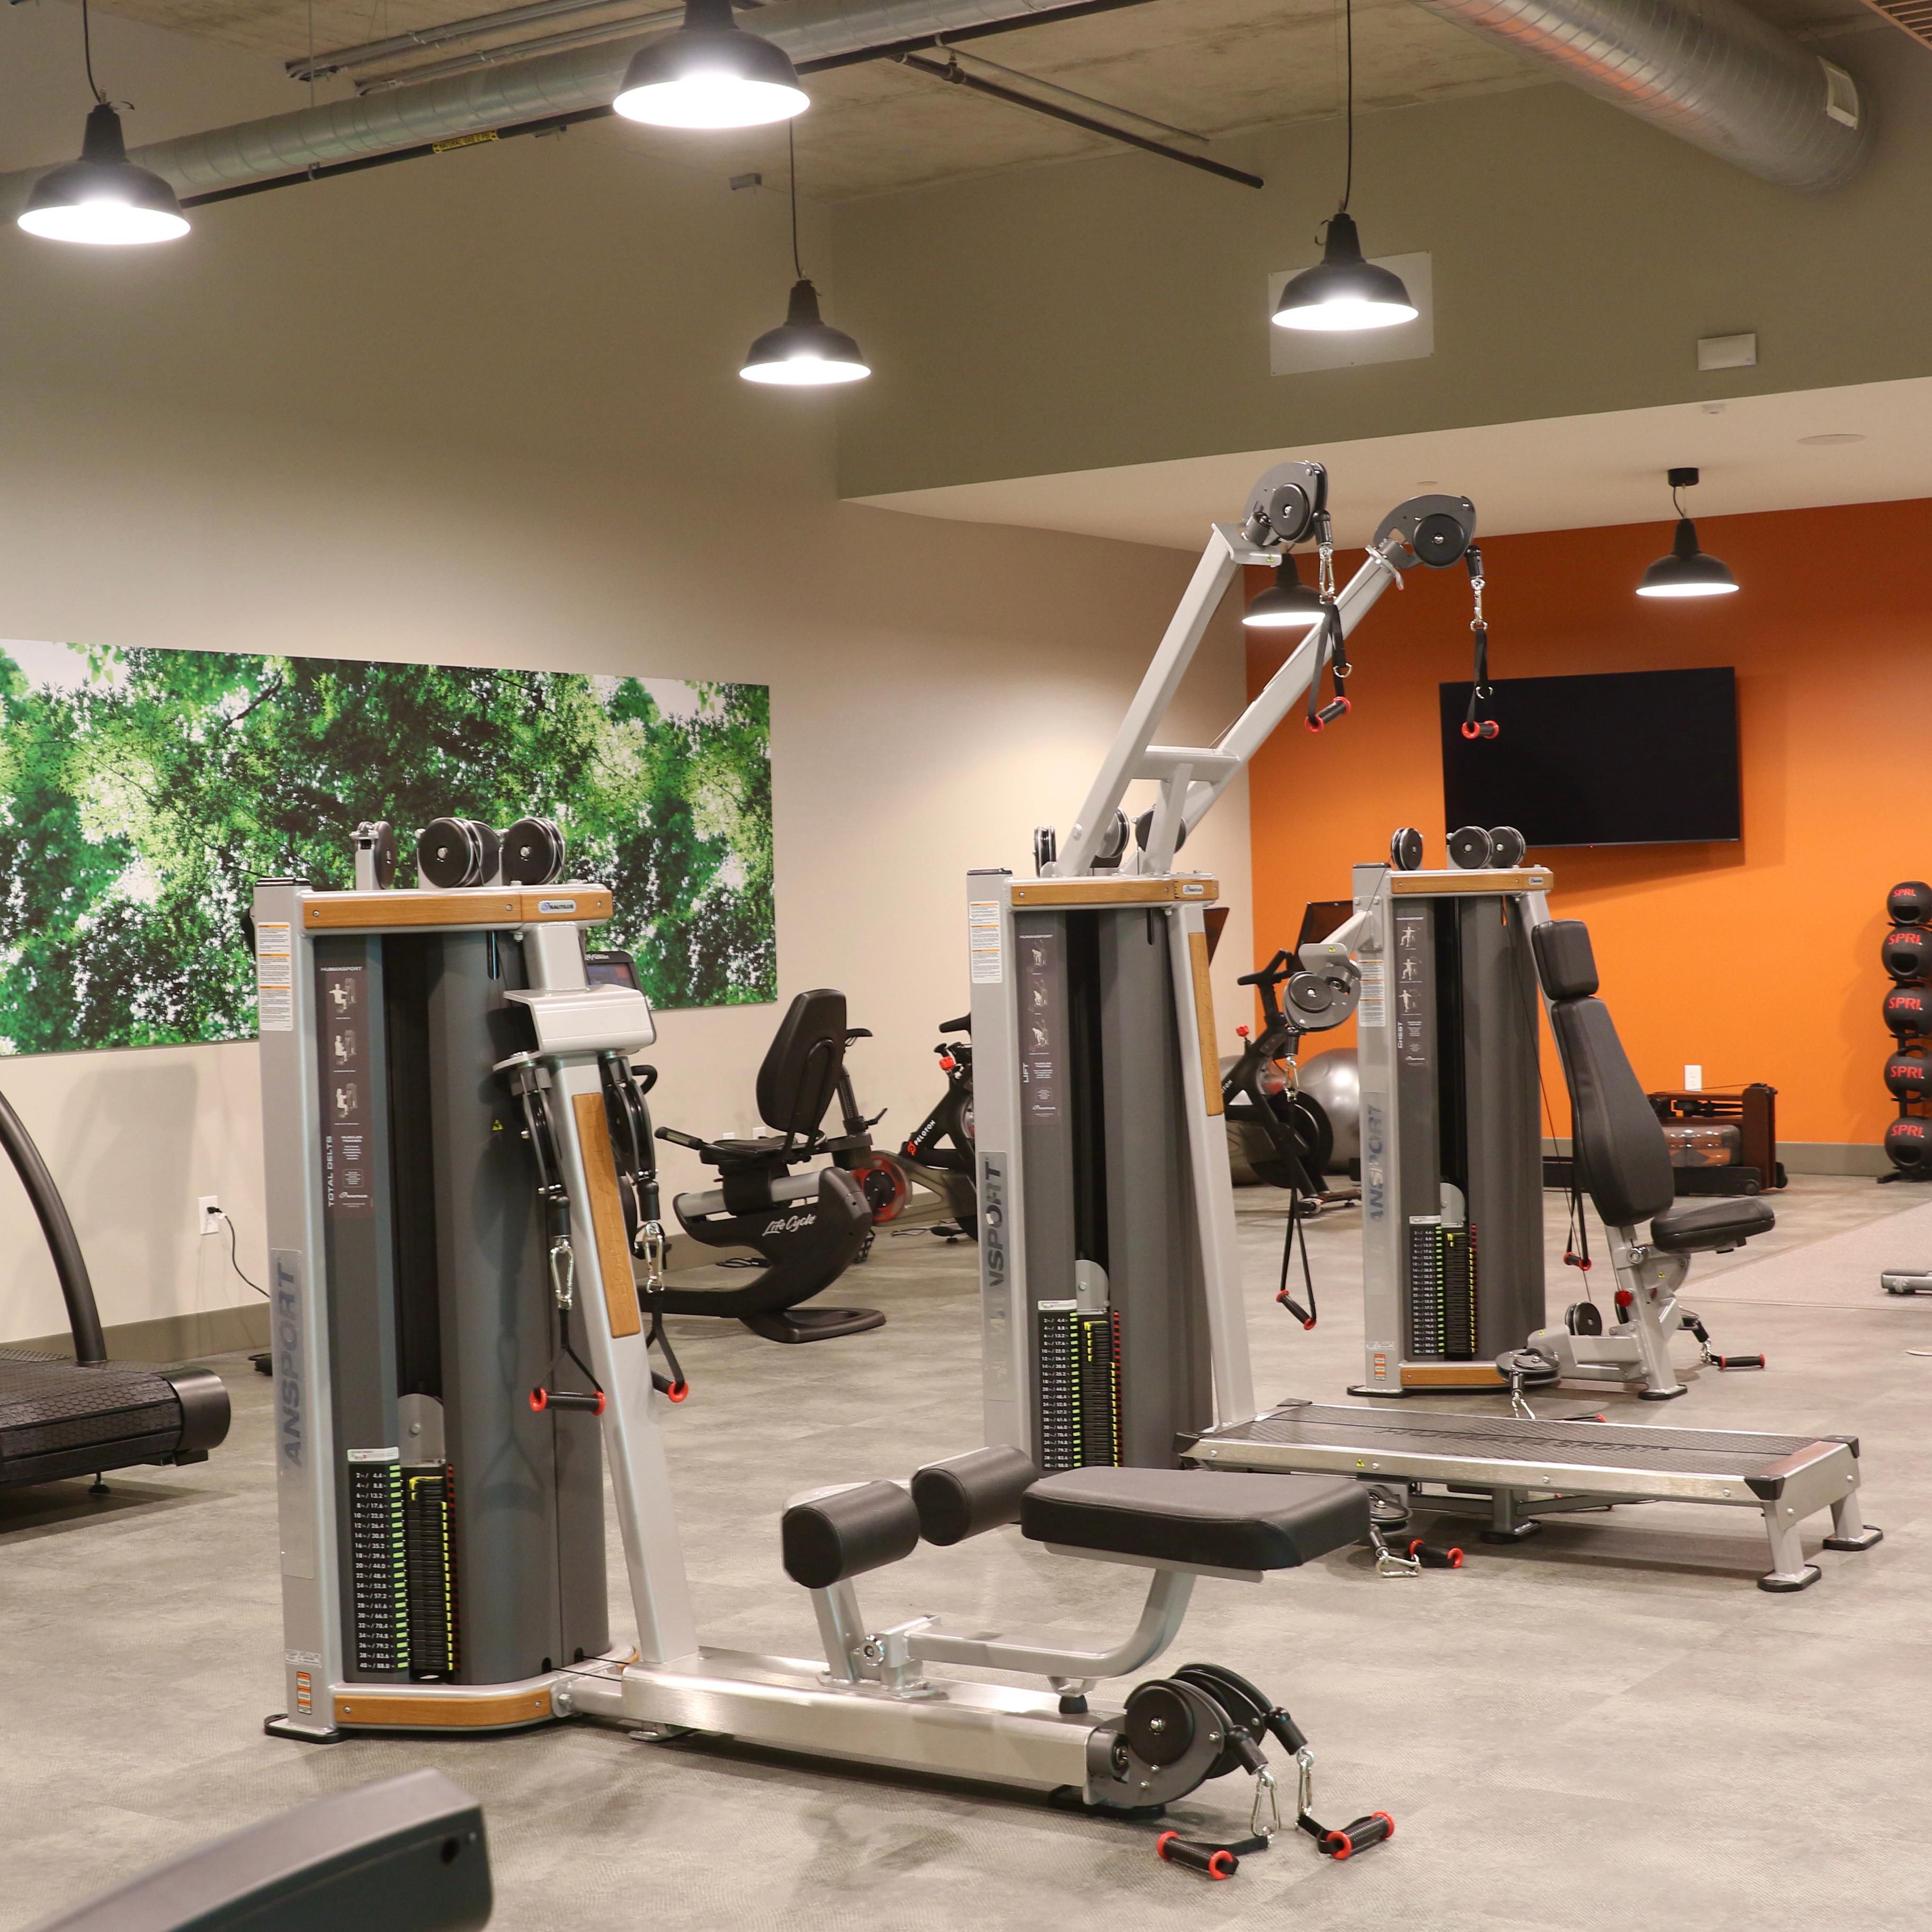 Our hotel gym is open 24/7 and has a variety of exercise equipment